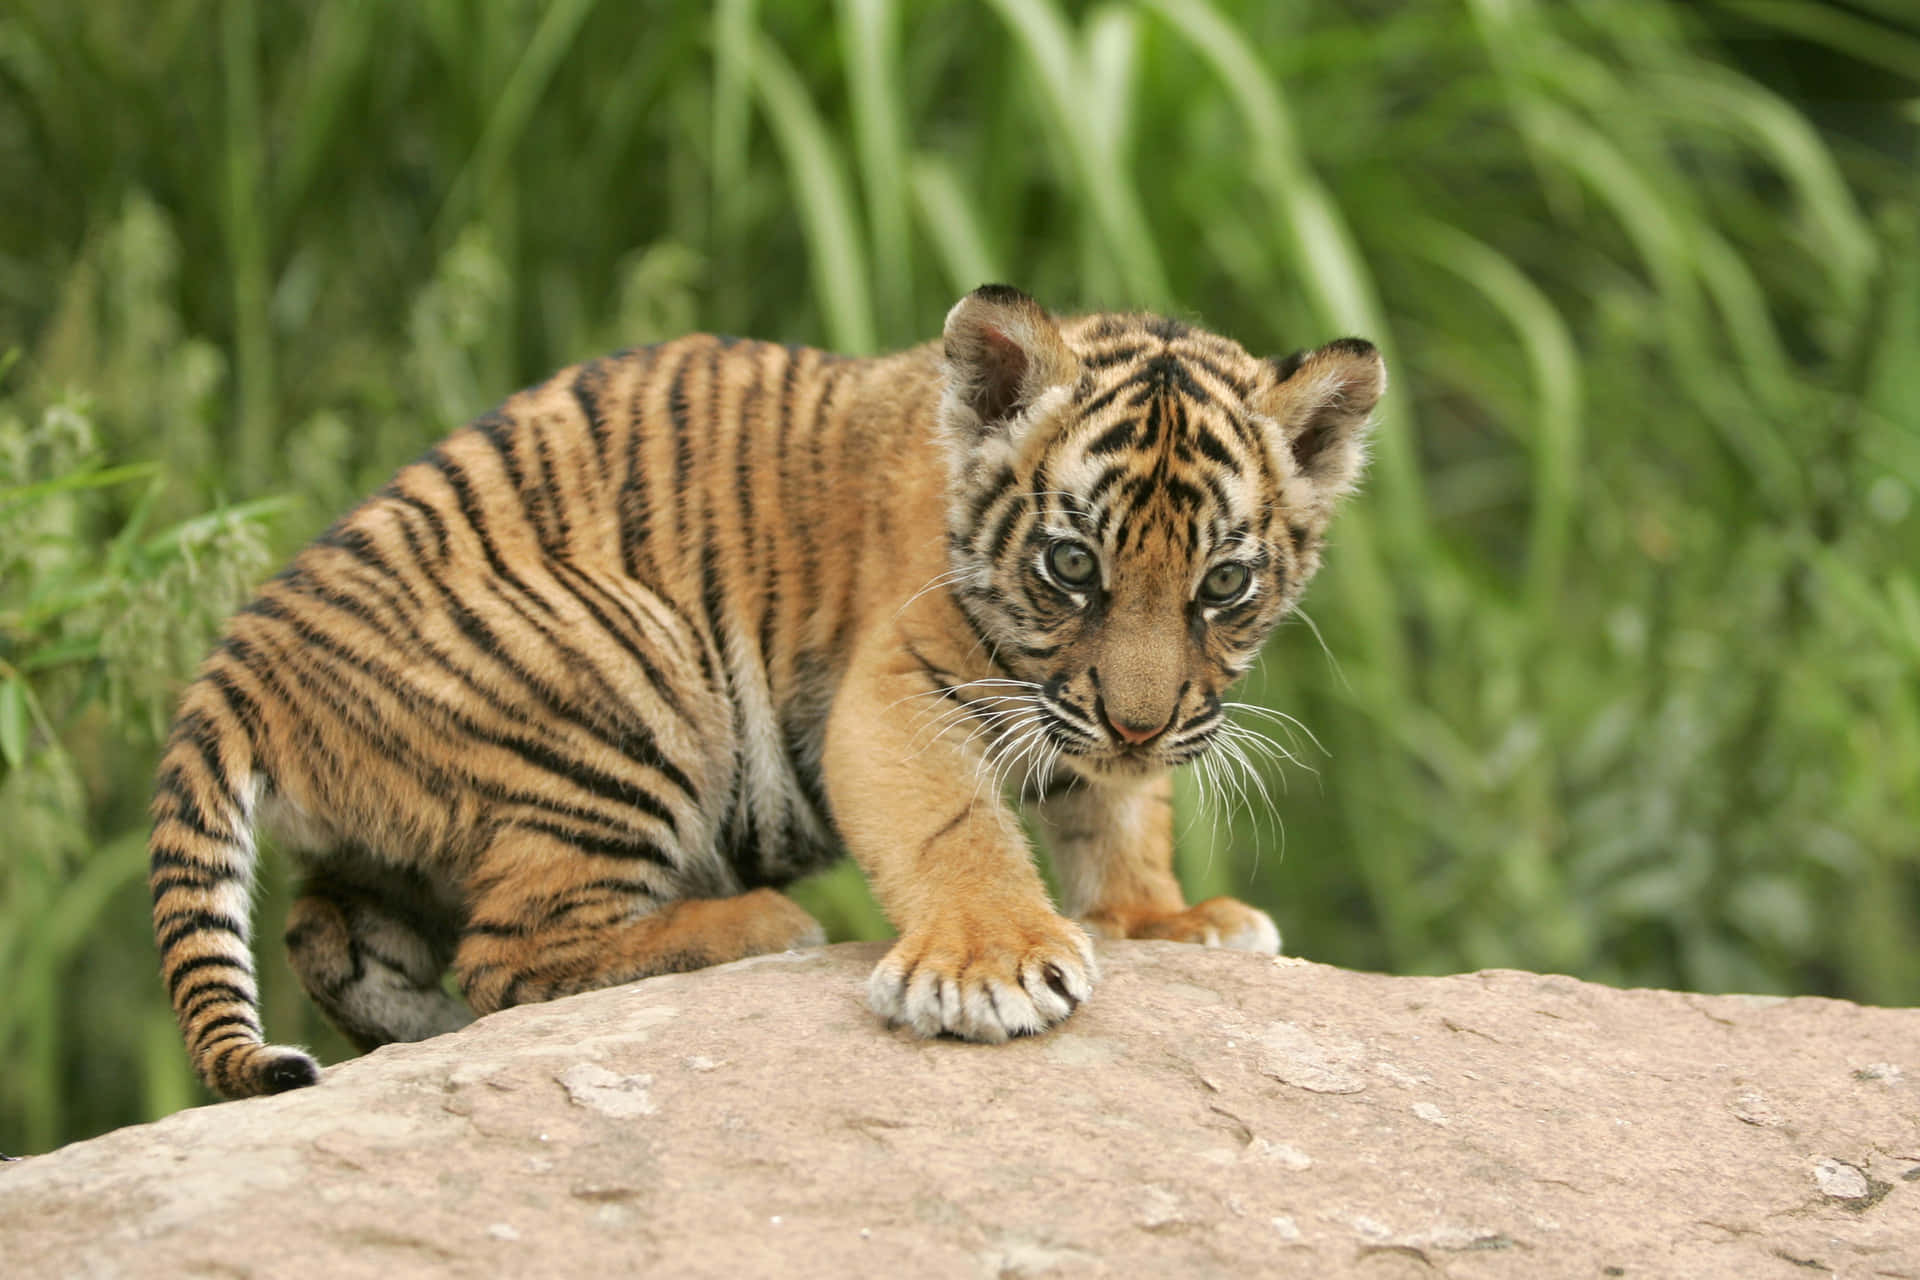 Adorable Baby Tiger Ready to Play